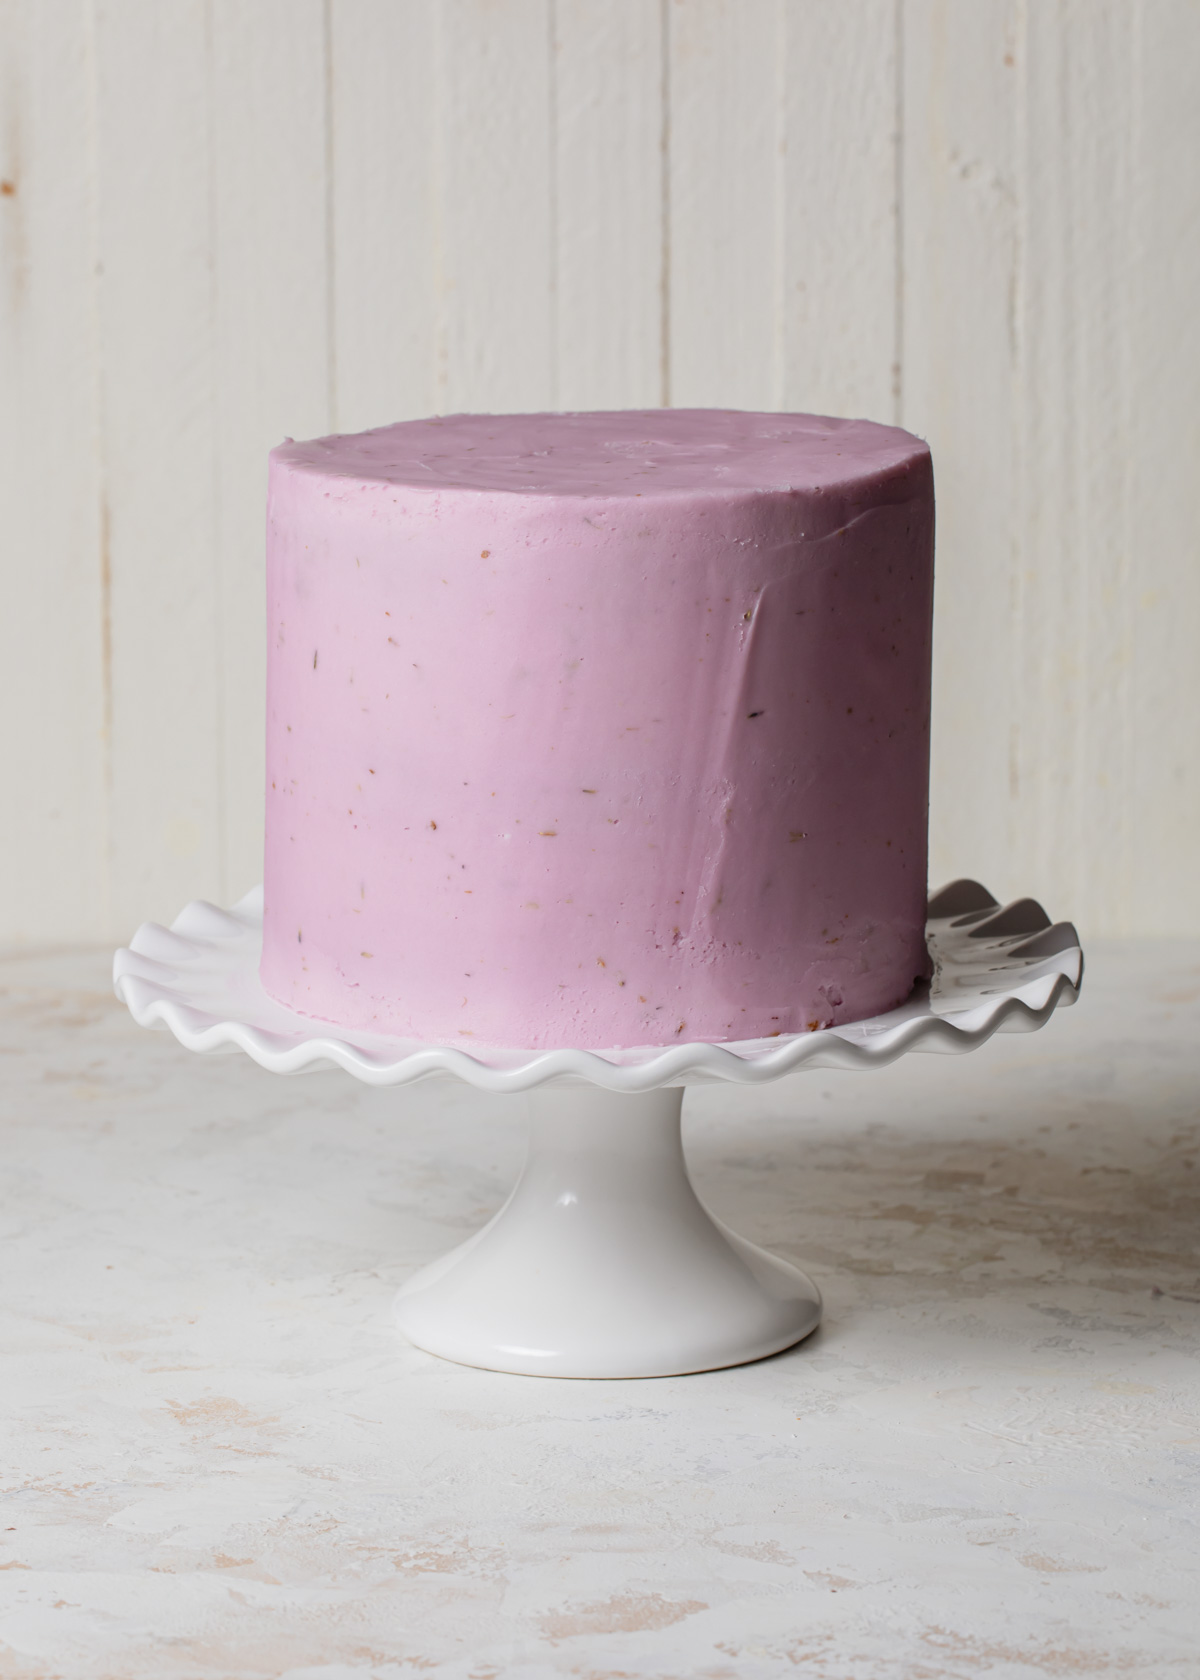 A smoothly iced lavender layer cake with purple frosting